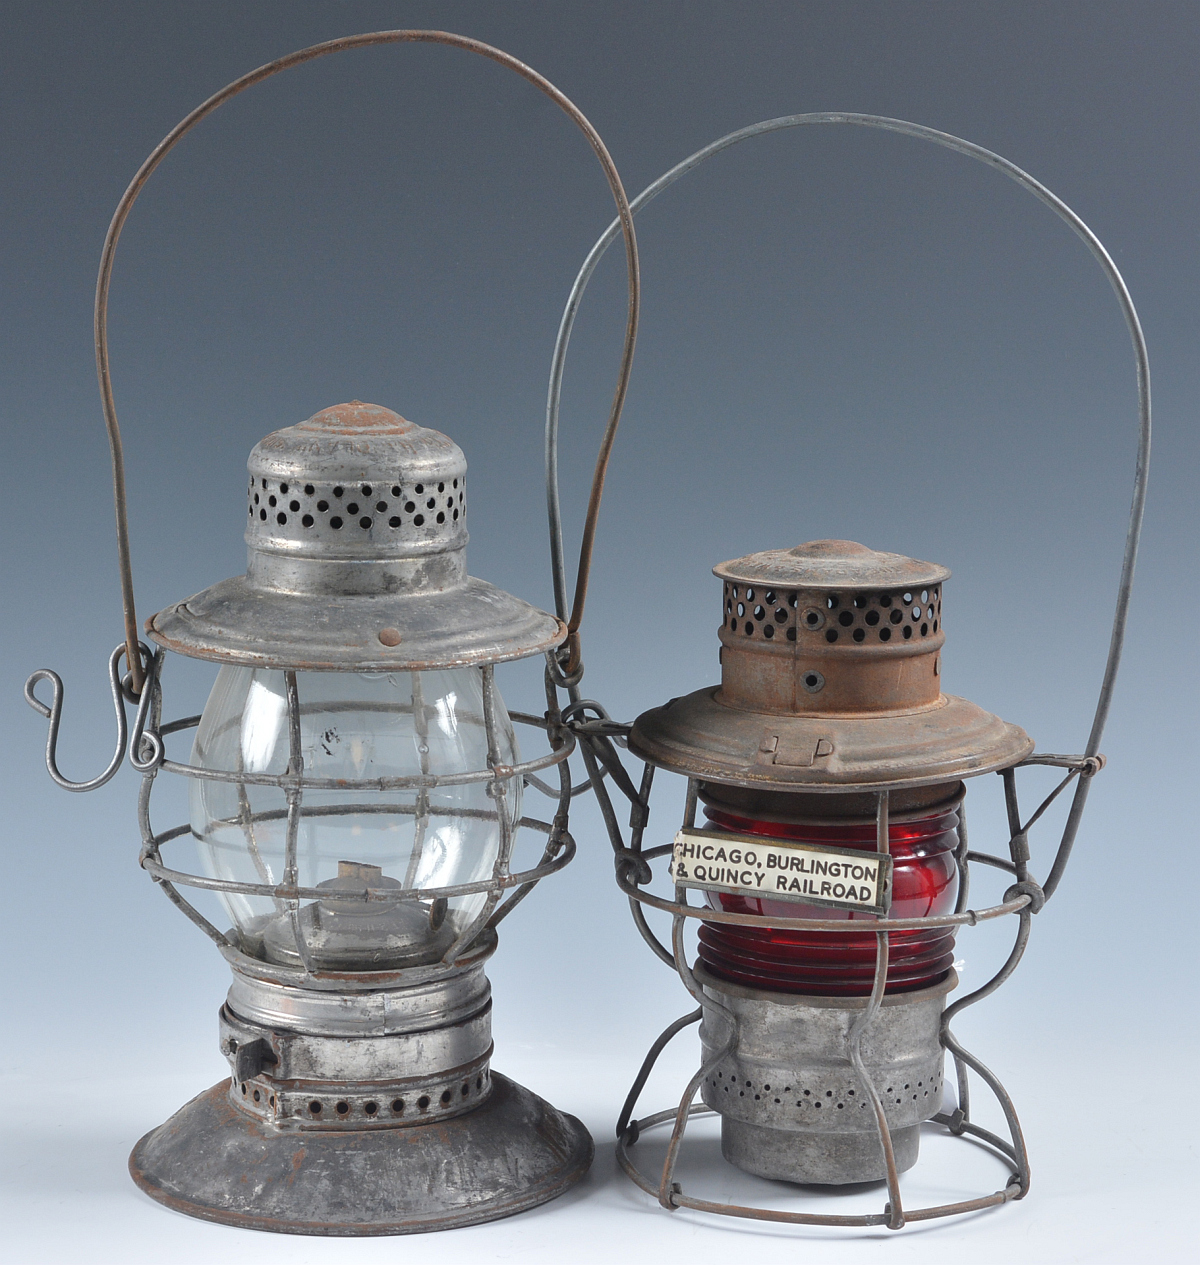 RAILROAD LANTERNS WITH MARKINGS FOR MoPAC AND C.B.&Q.